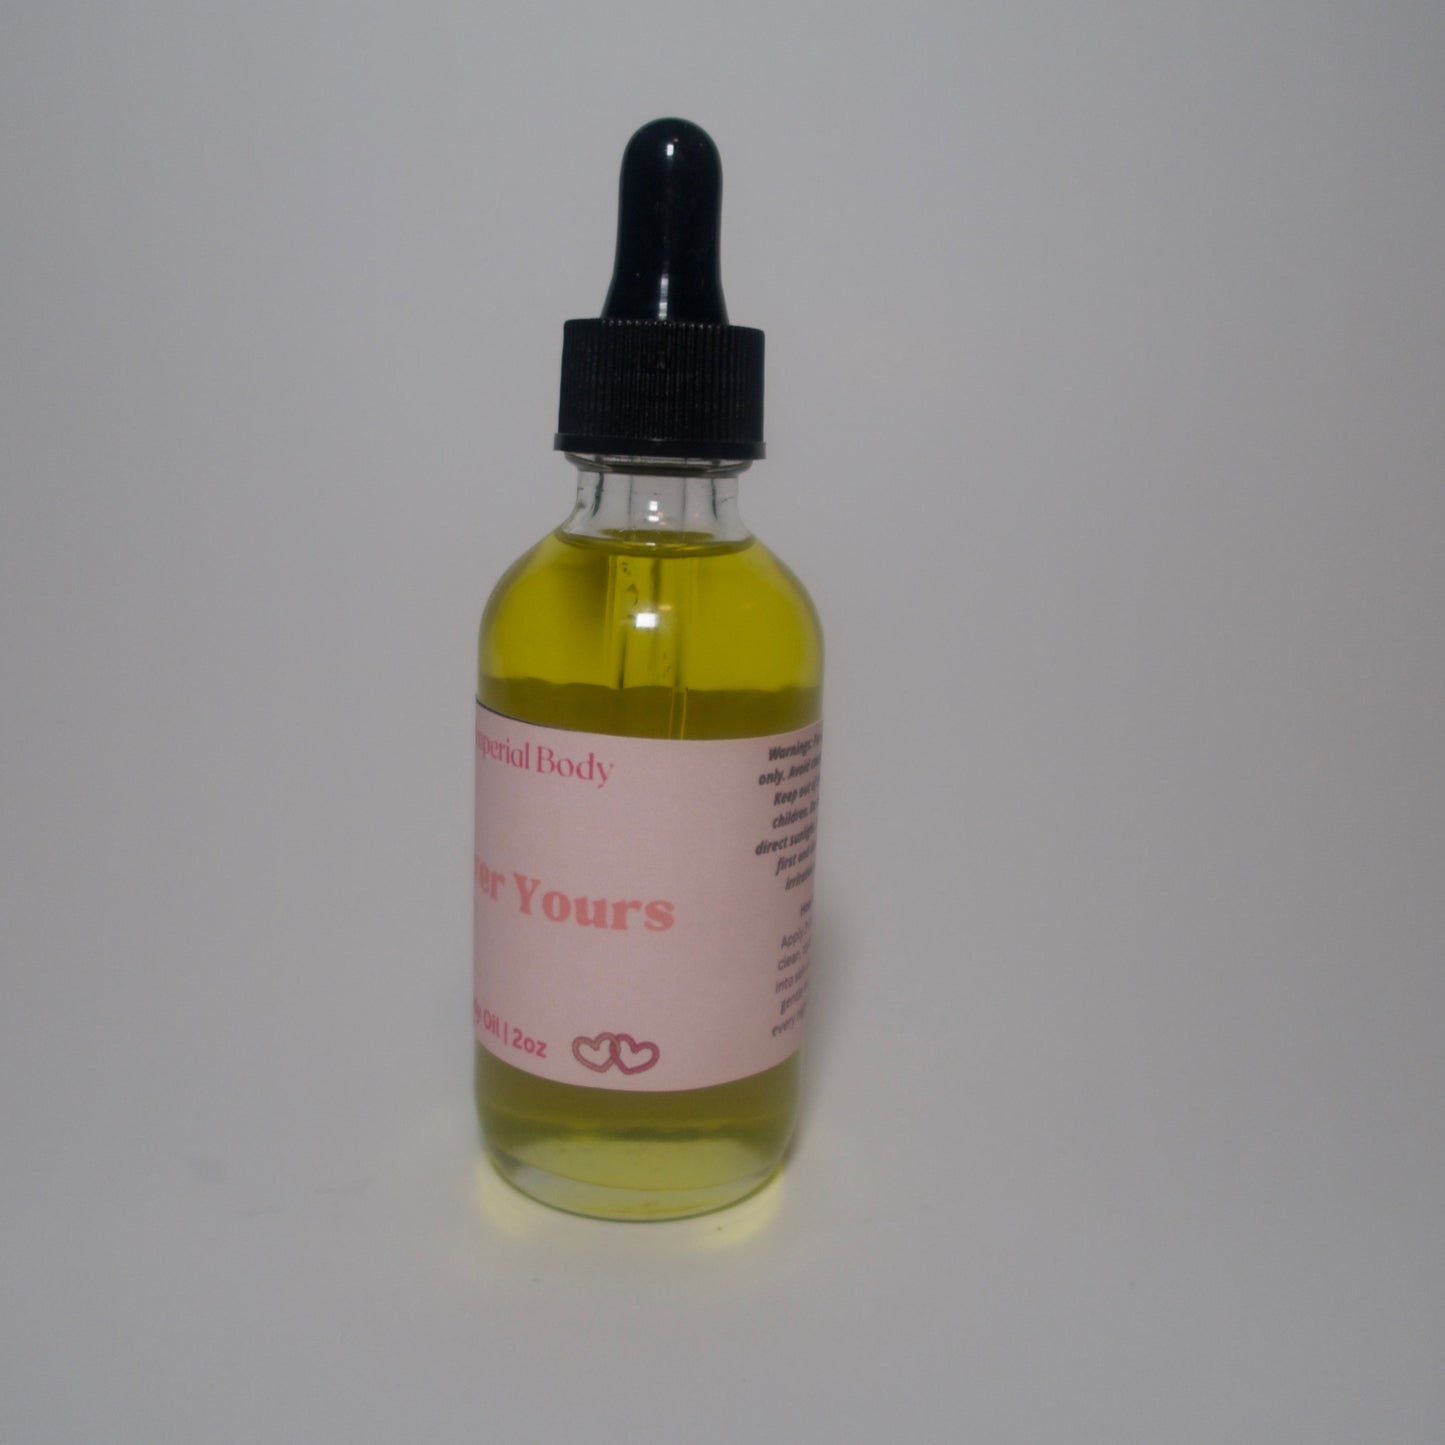 Forever Yours Body Oil